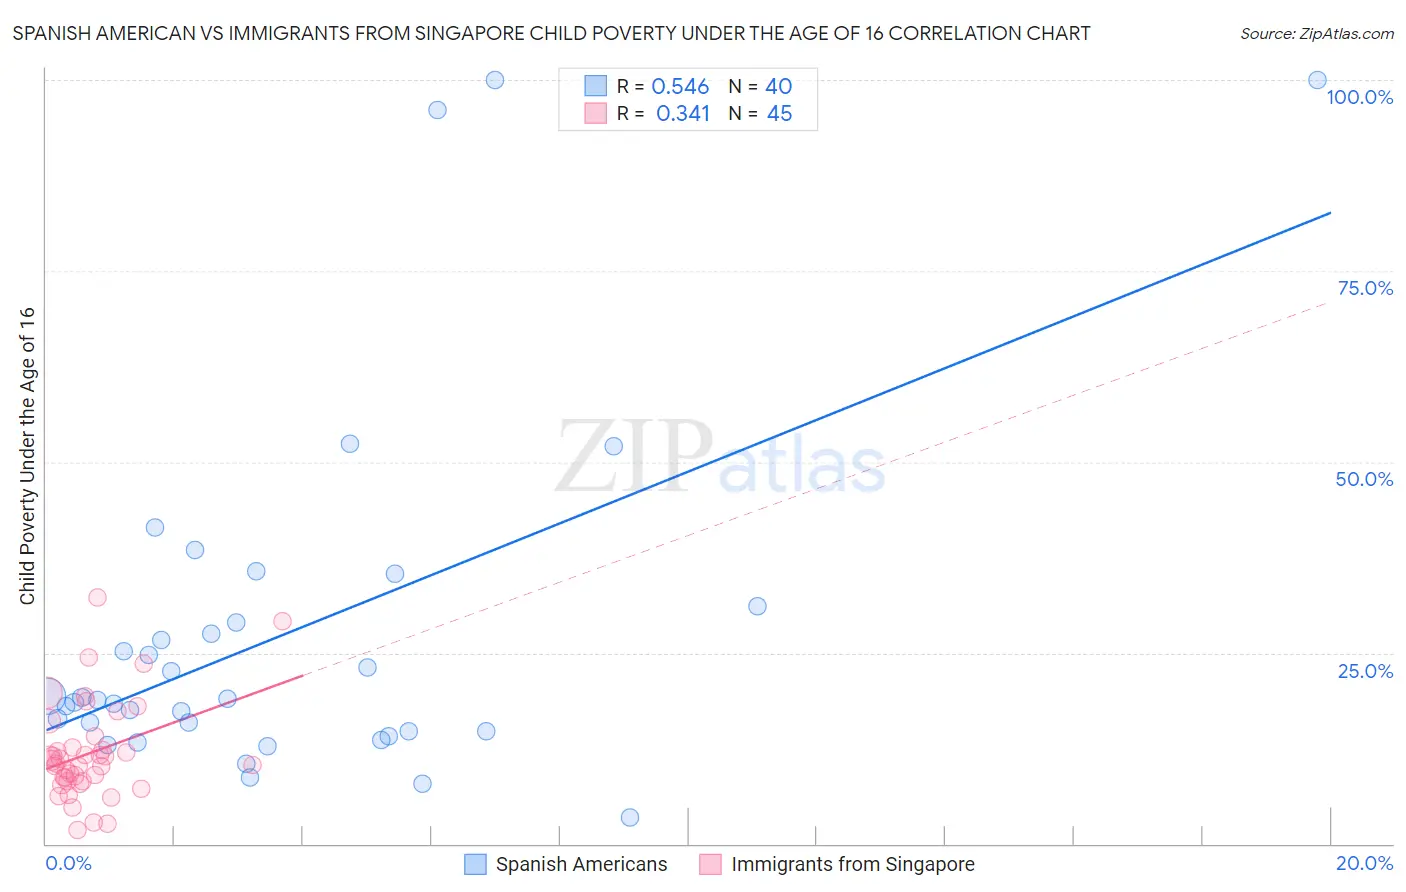 Spanish American vs Immigrants from Singapore Child Poverty Under the Age of 16